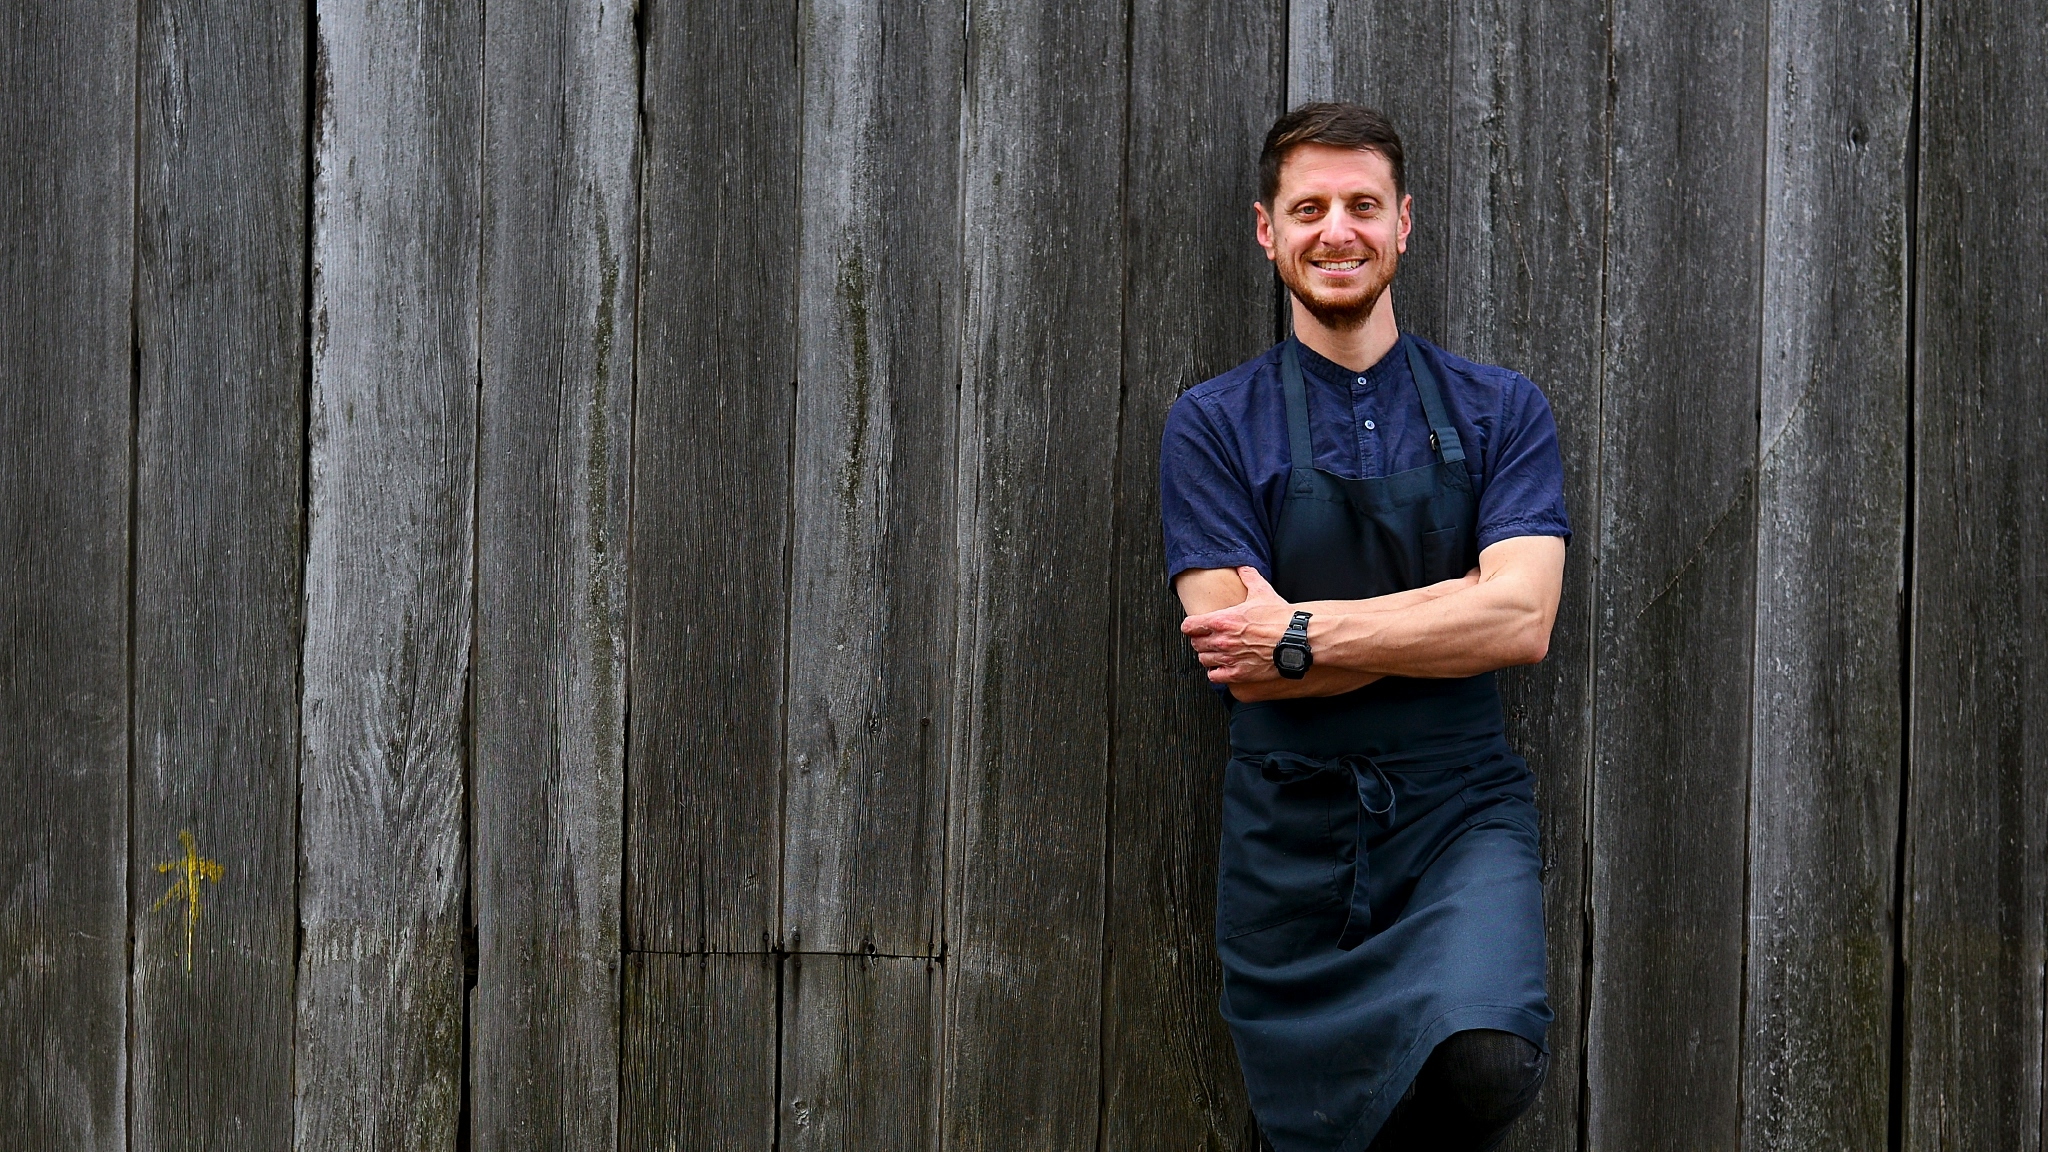 Chef Matteo Alberti stands arms crossed against a a wooden wall